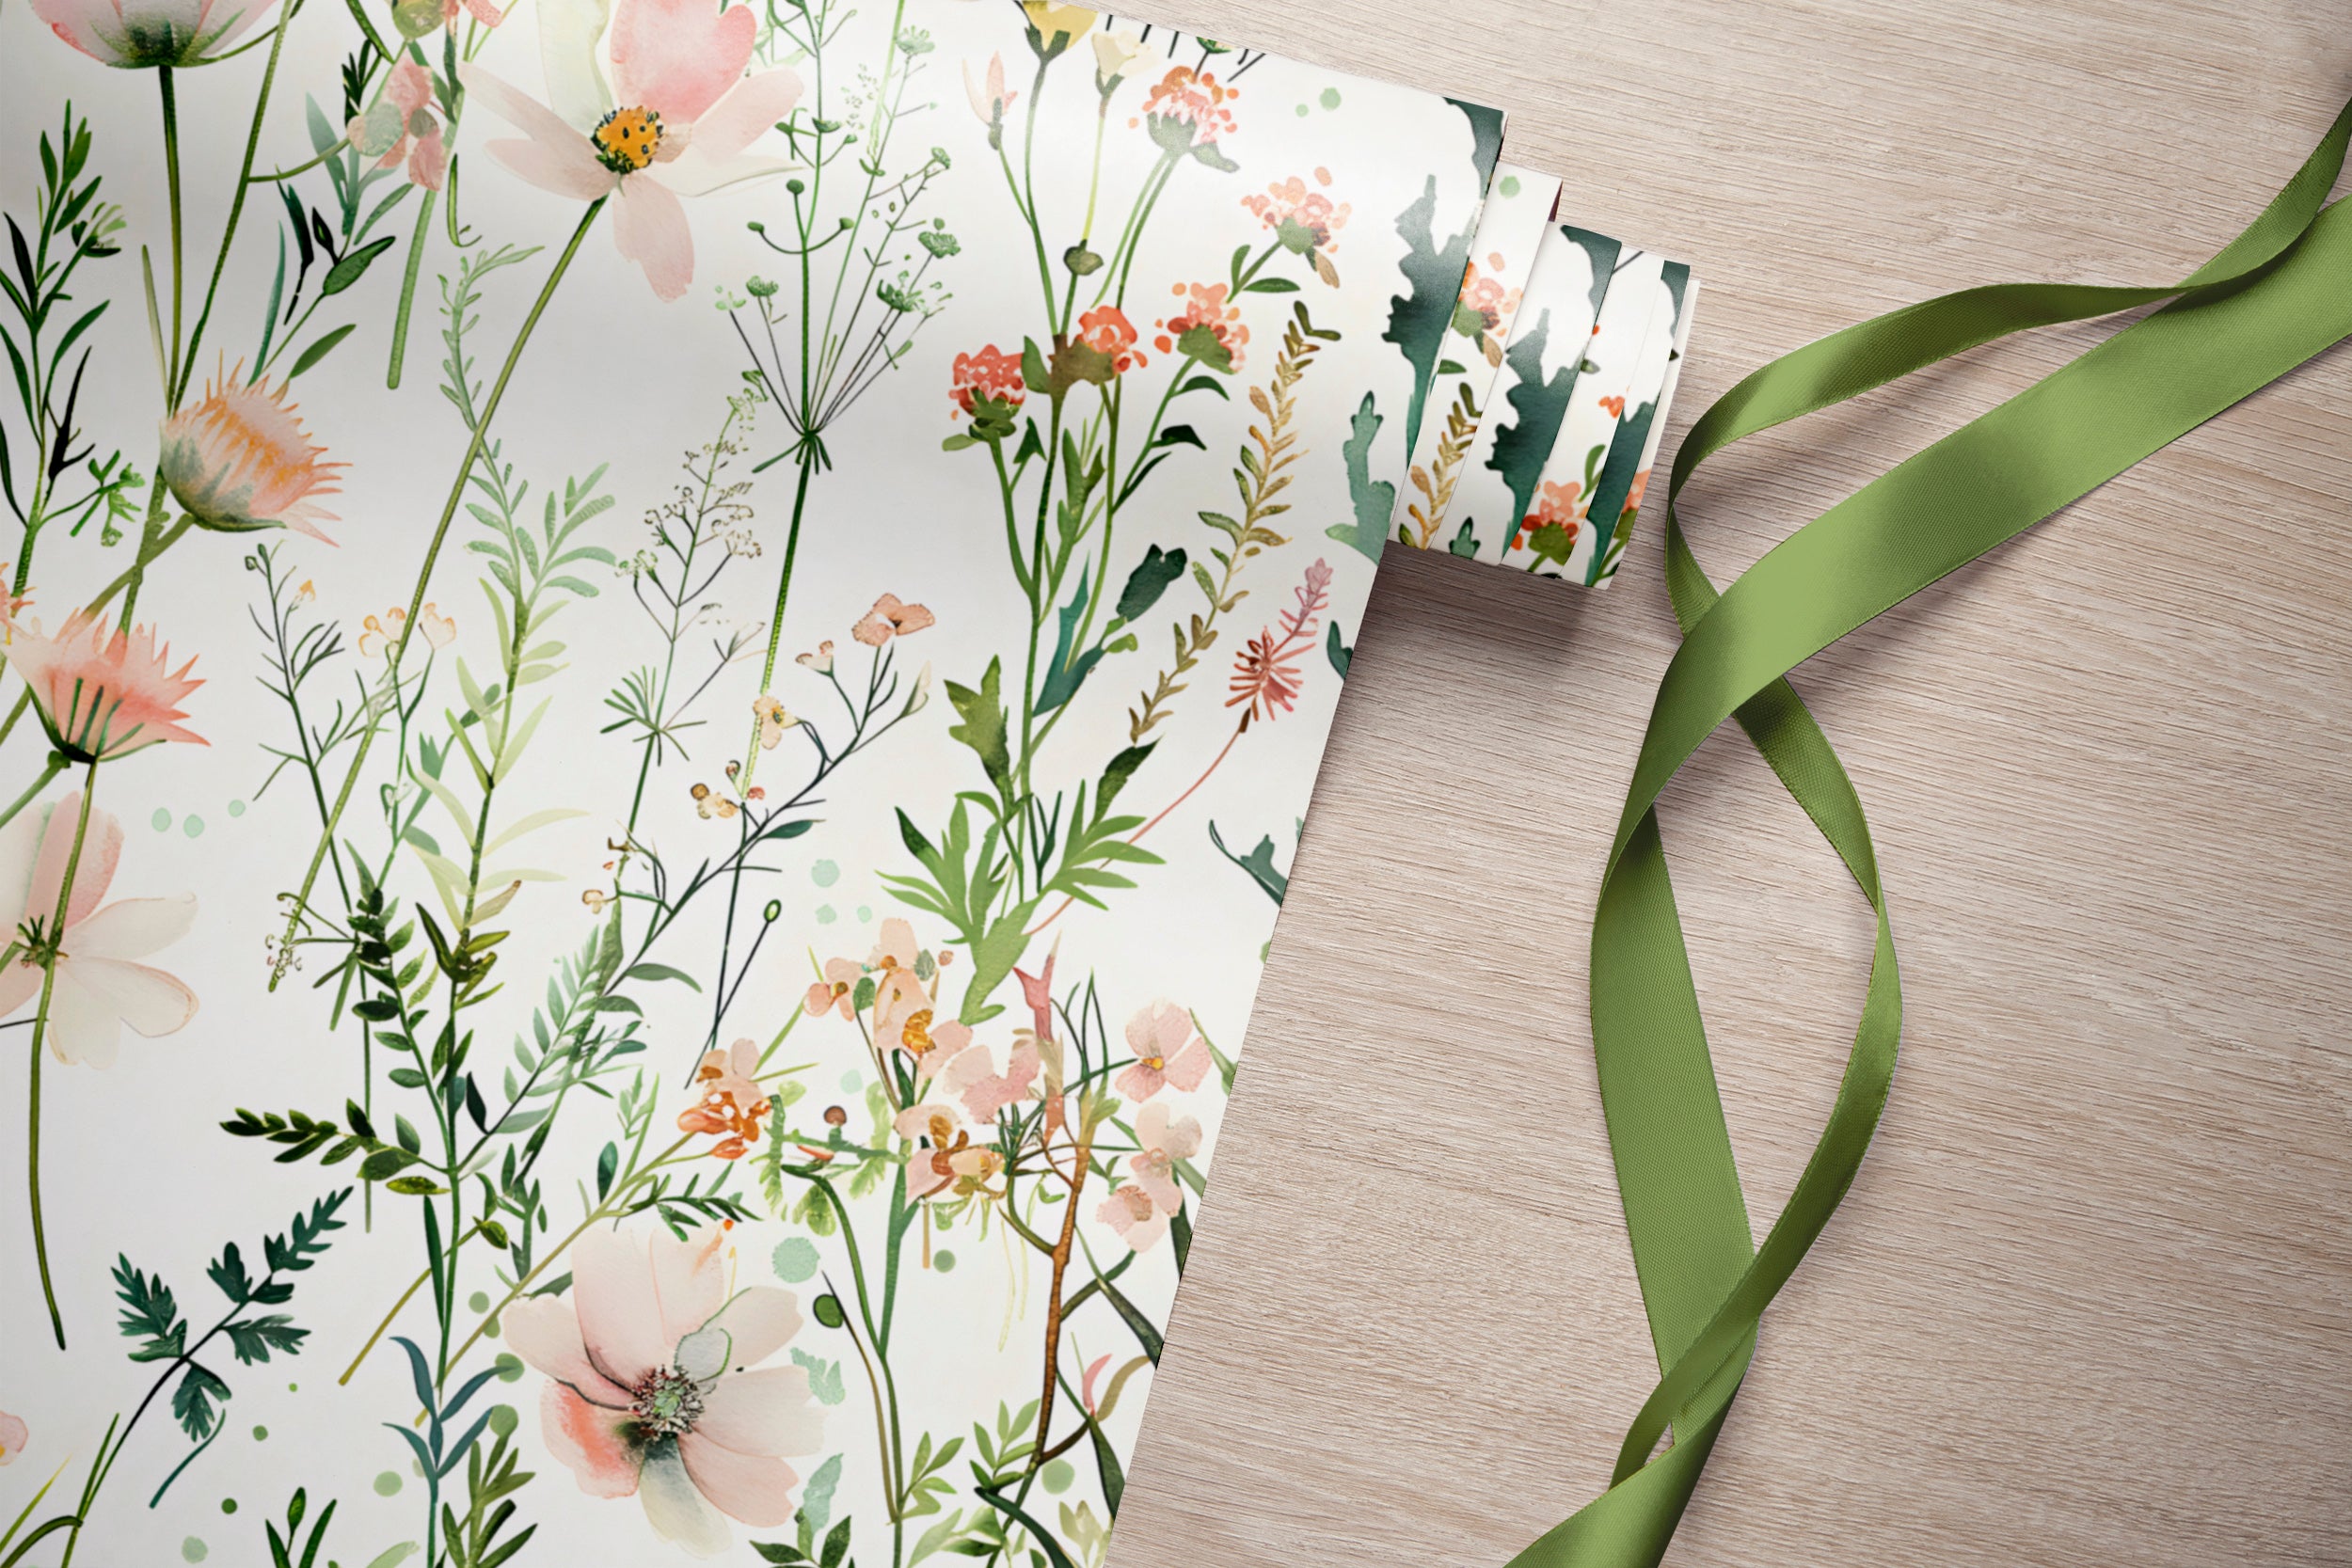 Wild Floral Wallpaper, Pastel Pink and Green Botanical Pattern Wallpaper, Watercolor Meadow Flowers Decal, Peel and Stick Minimalistic Light Floral Decor